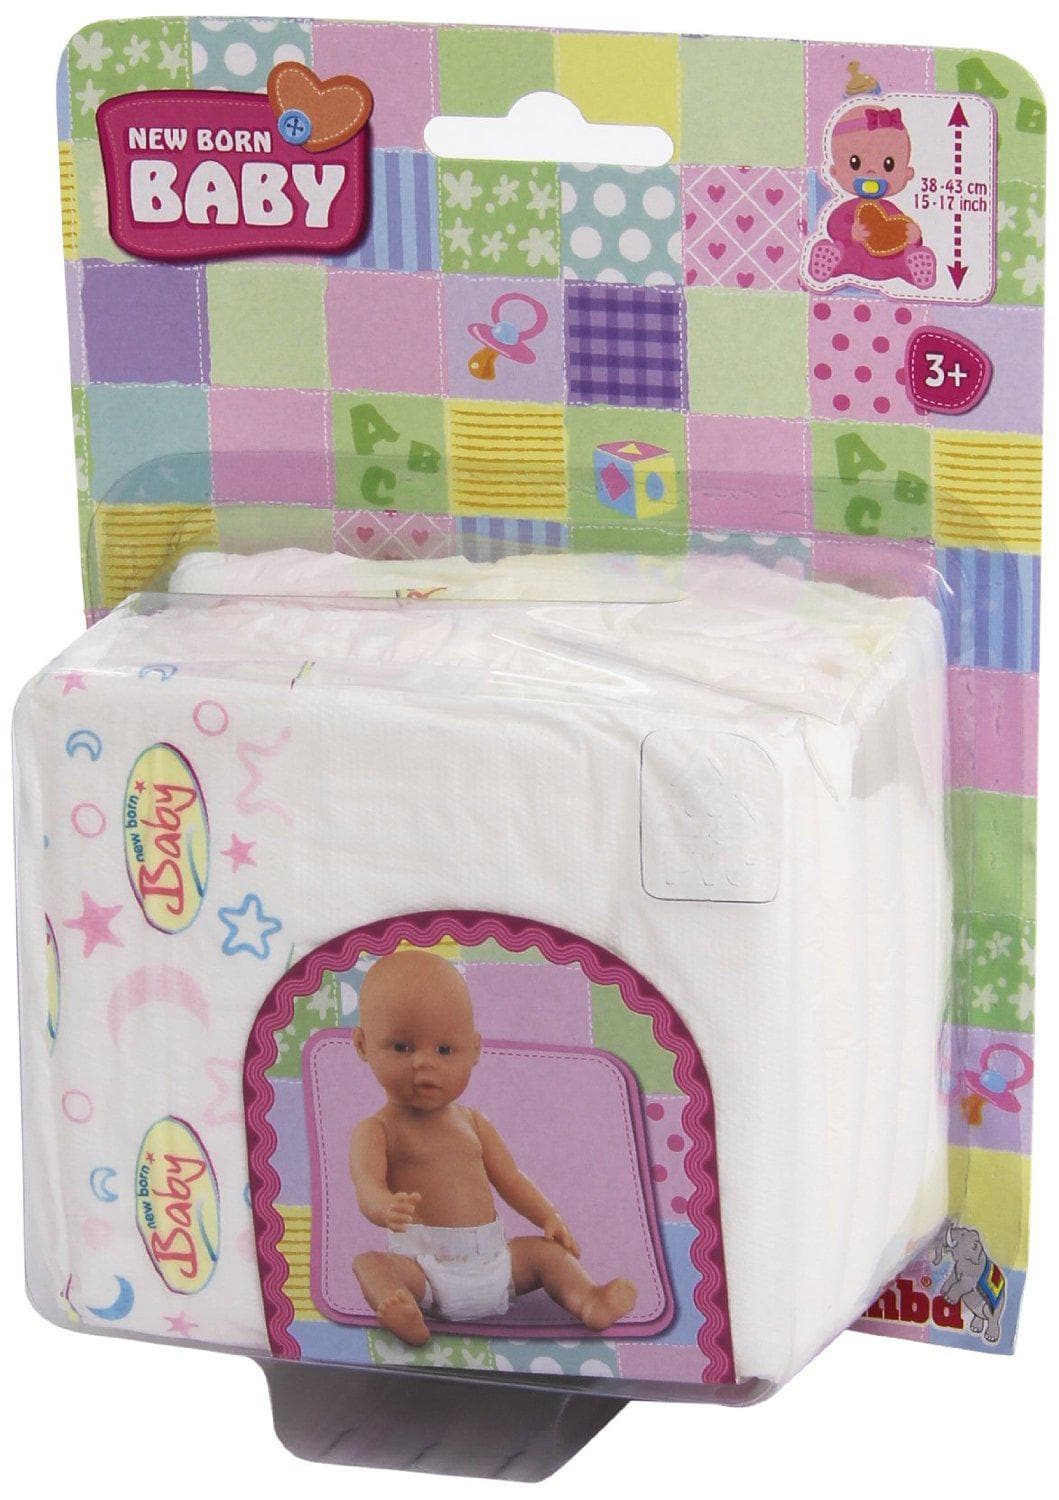 New Born Baby 5 Doll Diapers